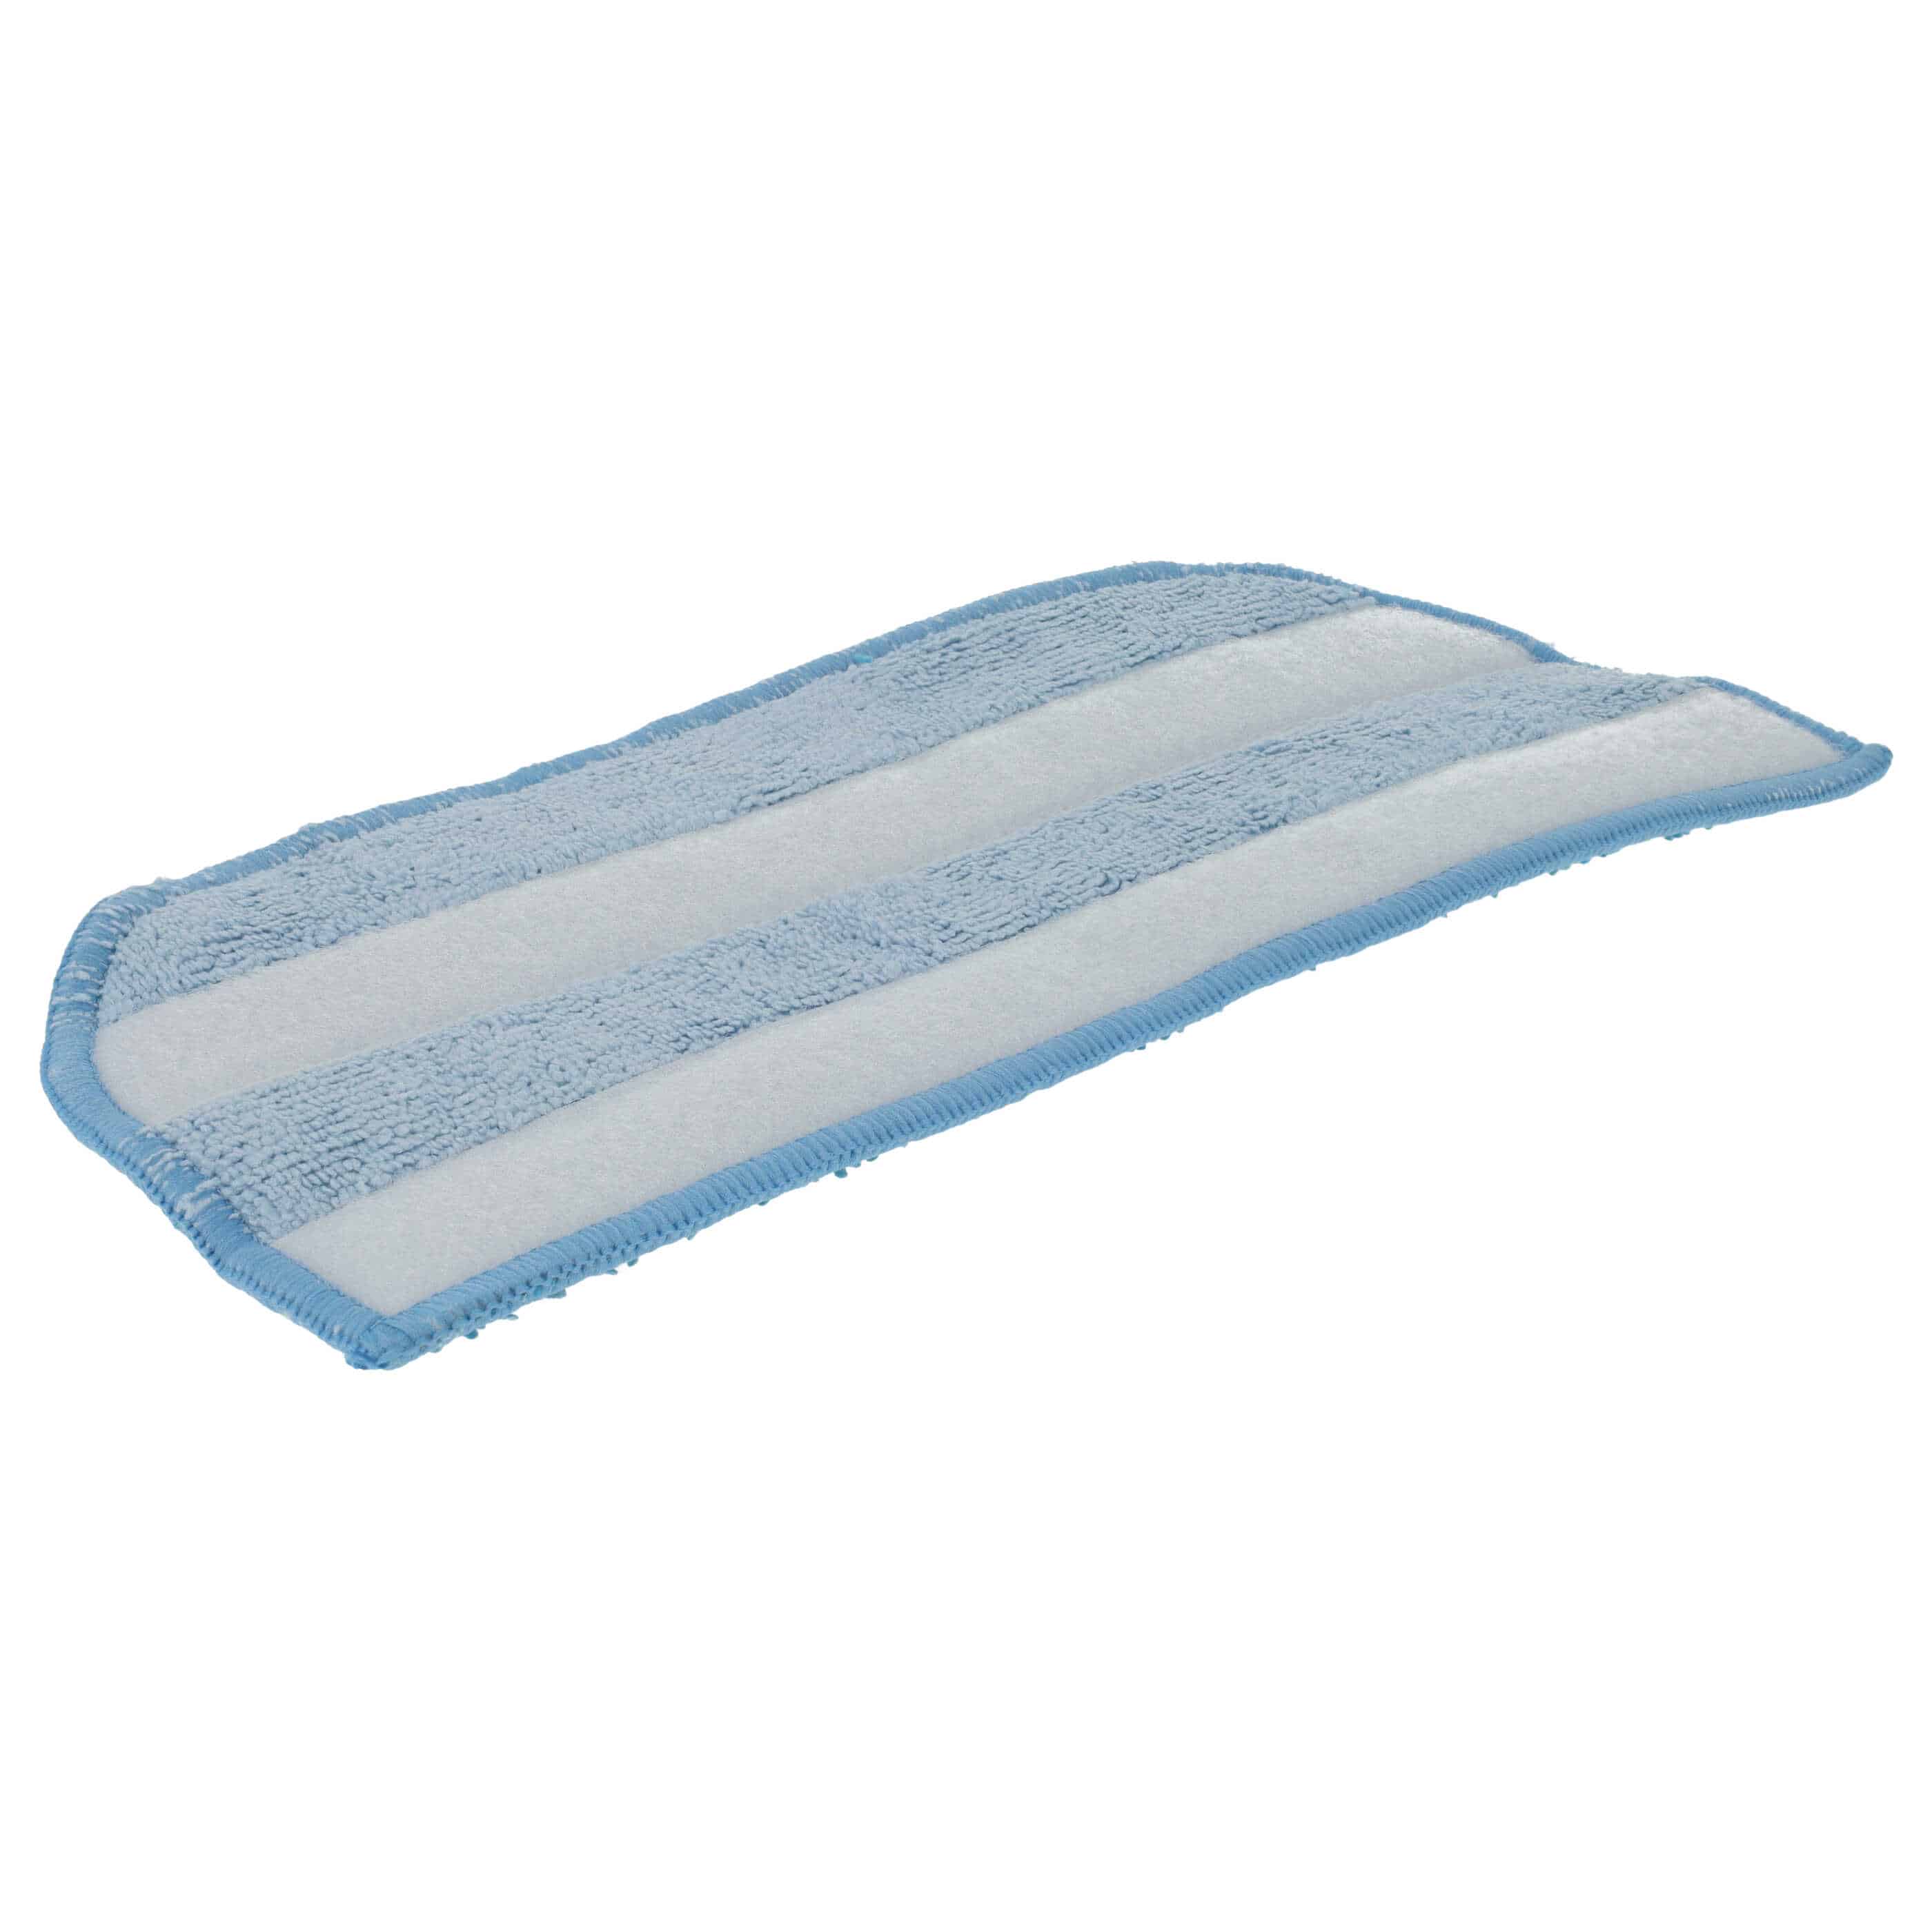 Cleaning Pad replaces Philips 432200493831 for PhilipsHot Spray Steamer, Steam Mop - Microfibre Blue